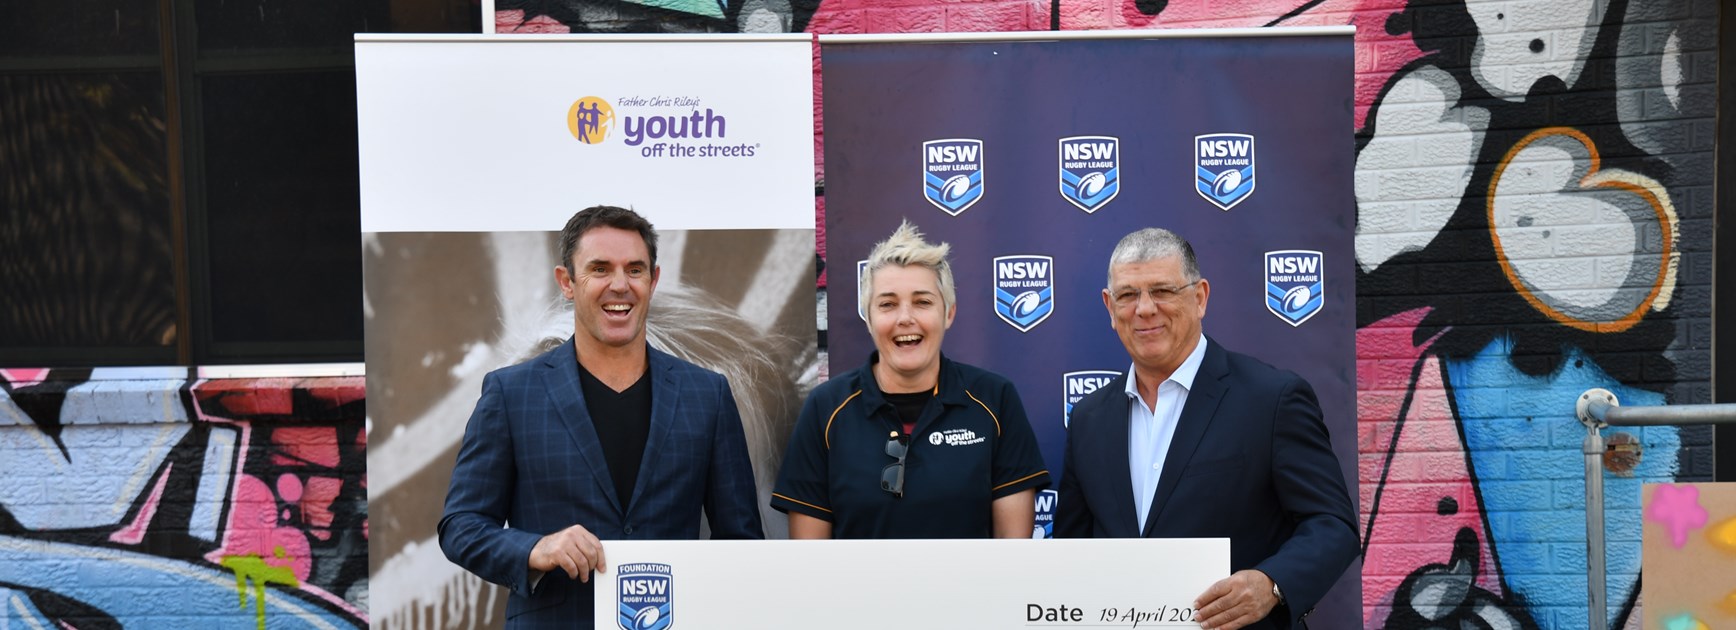 Fittler continues support for Youth Off The Streets